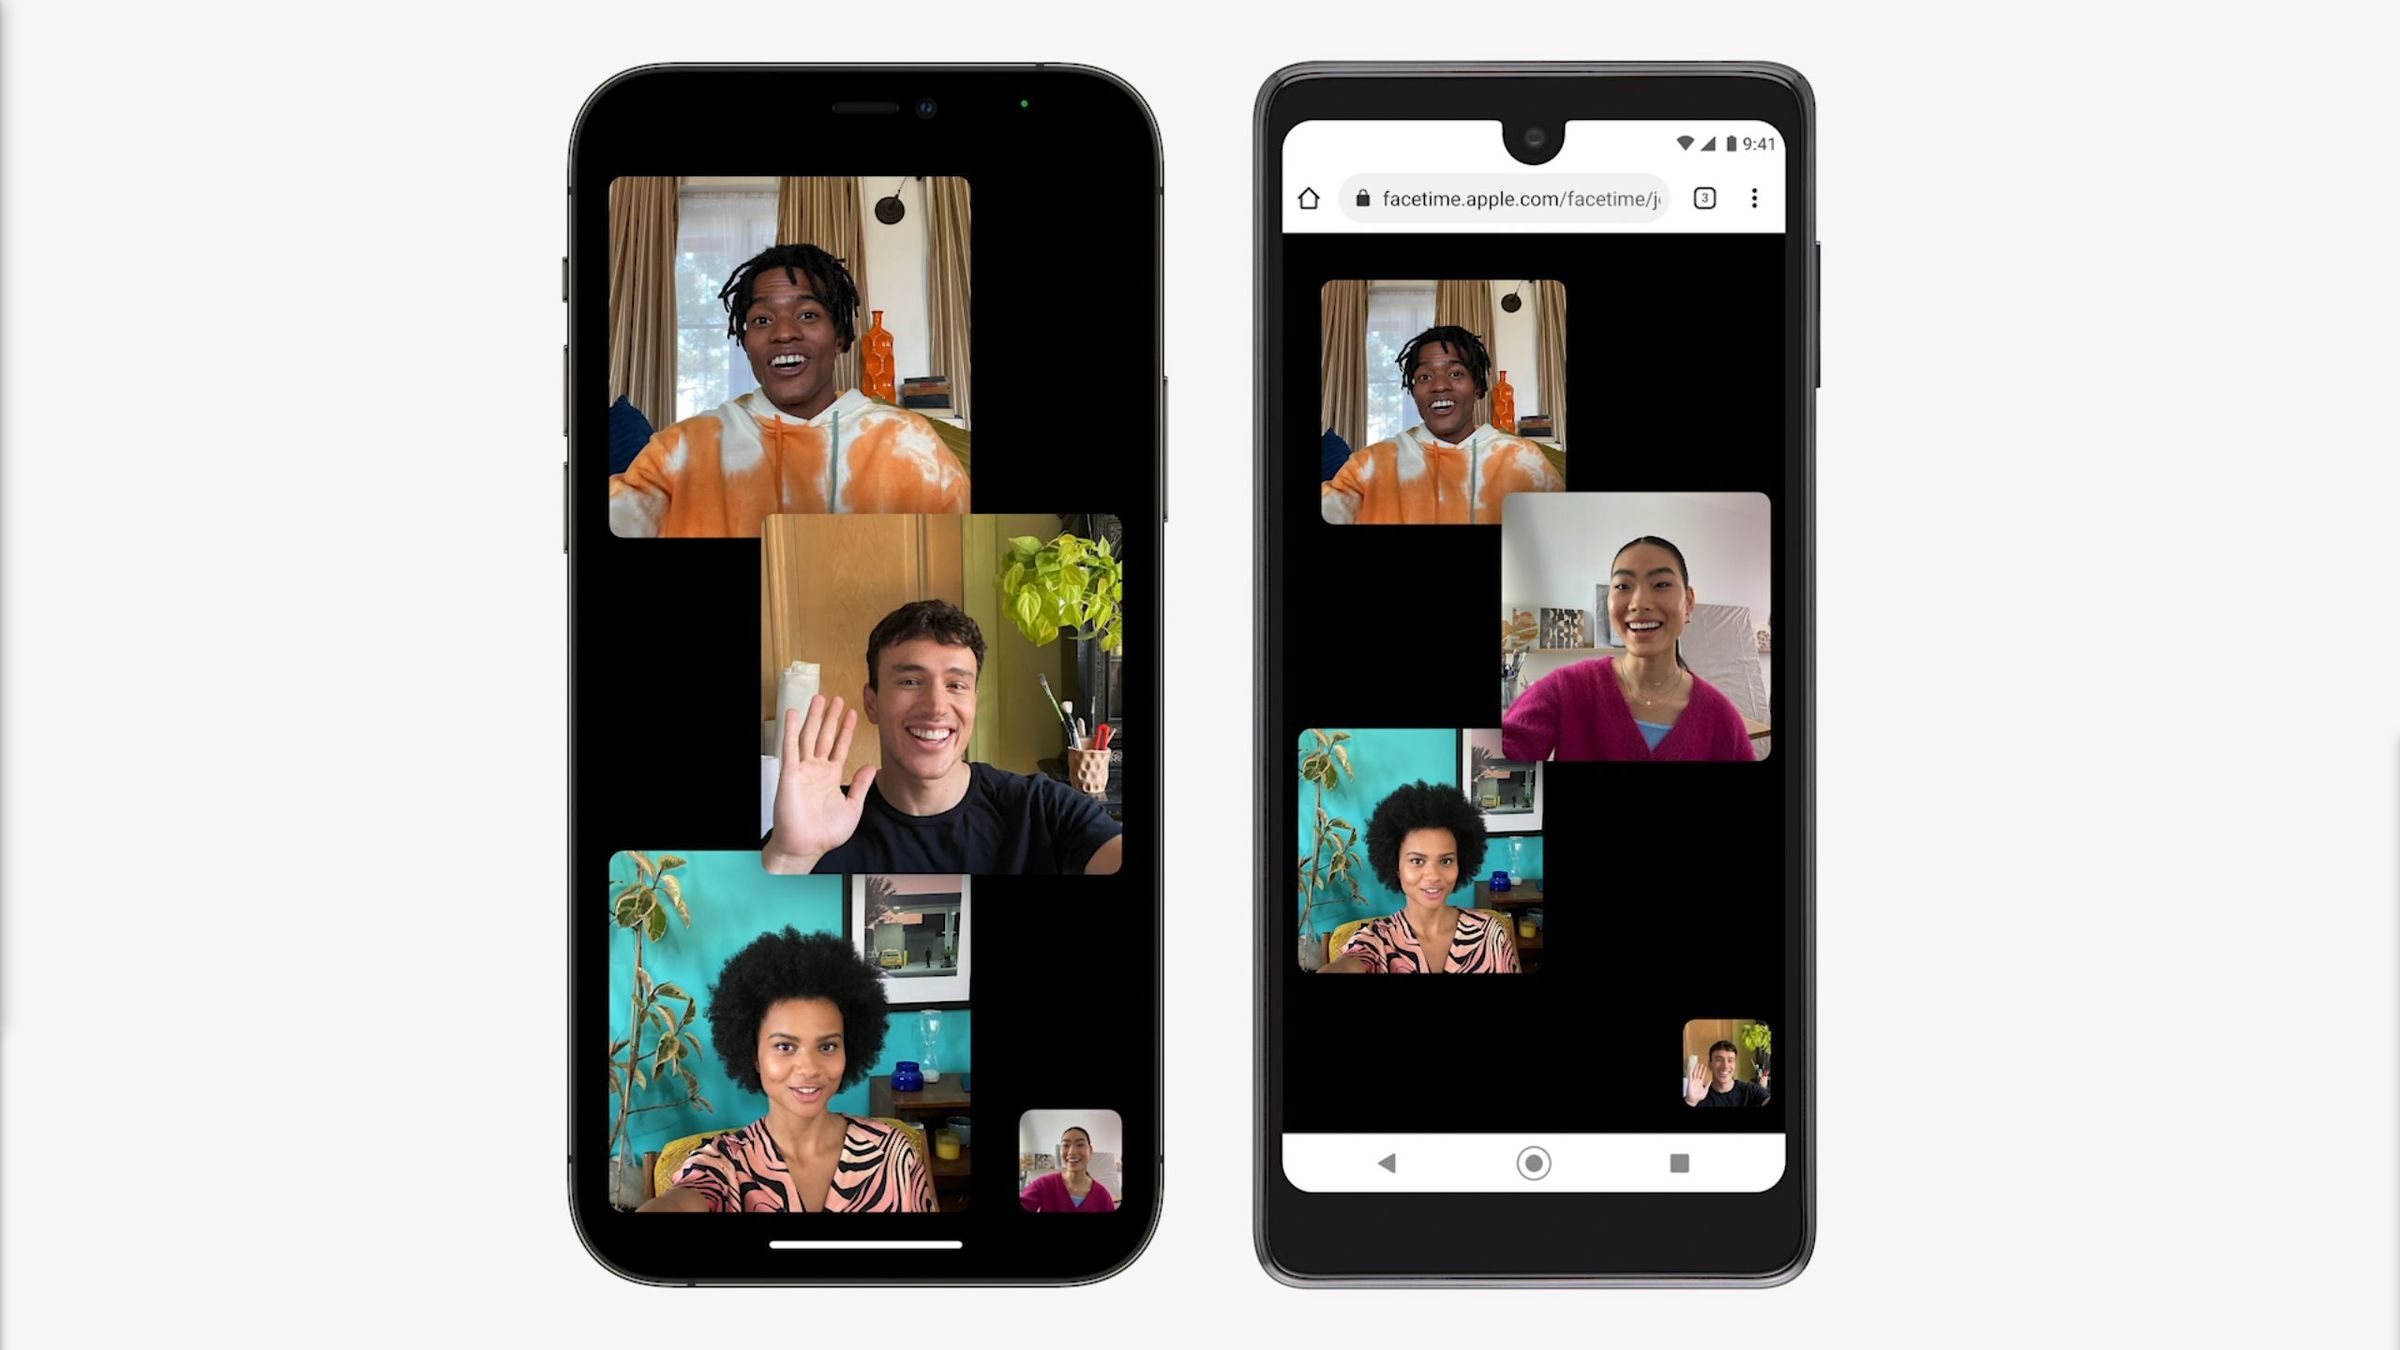 Shareable links make it easier to schedule FaceTime calls.